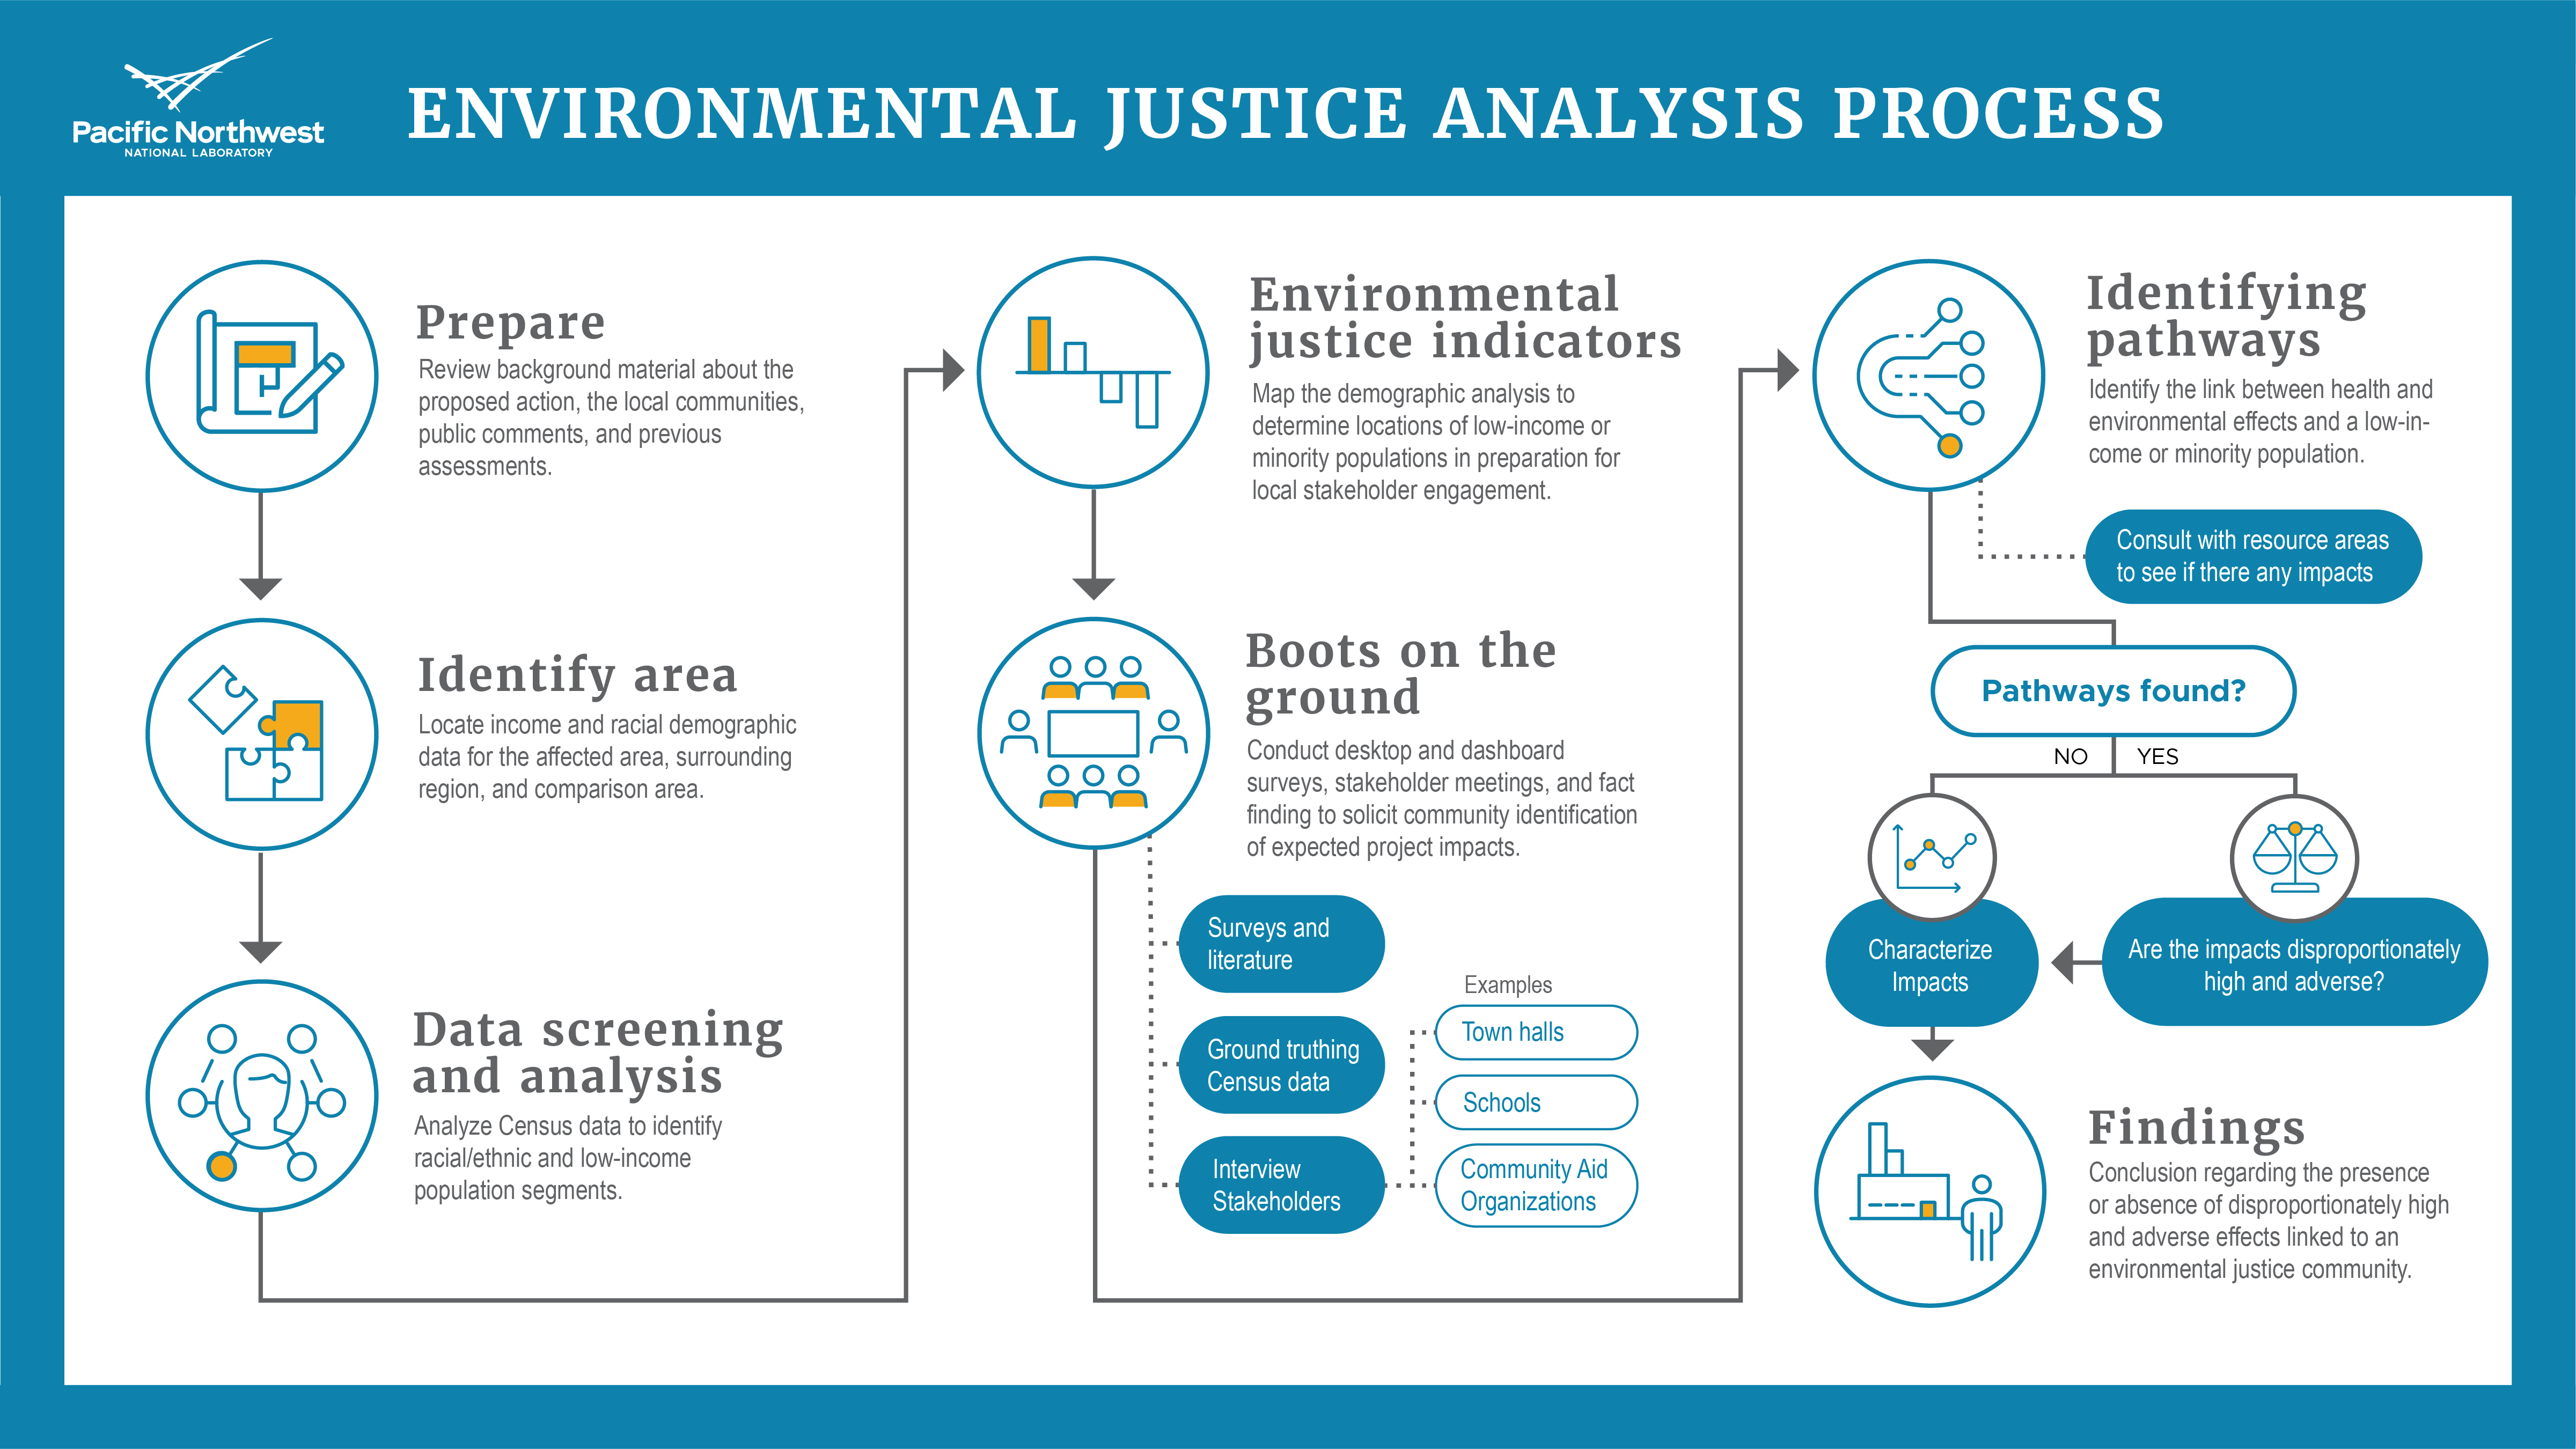 A flowchart showing the Environmental Justice analysis process, from preparations to engagement to findings.